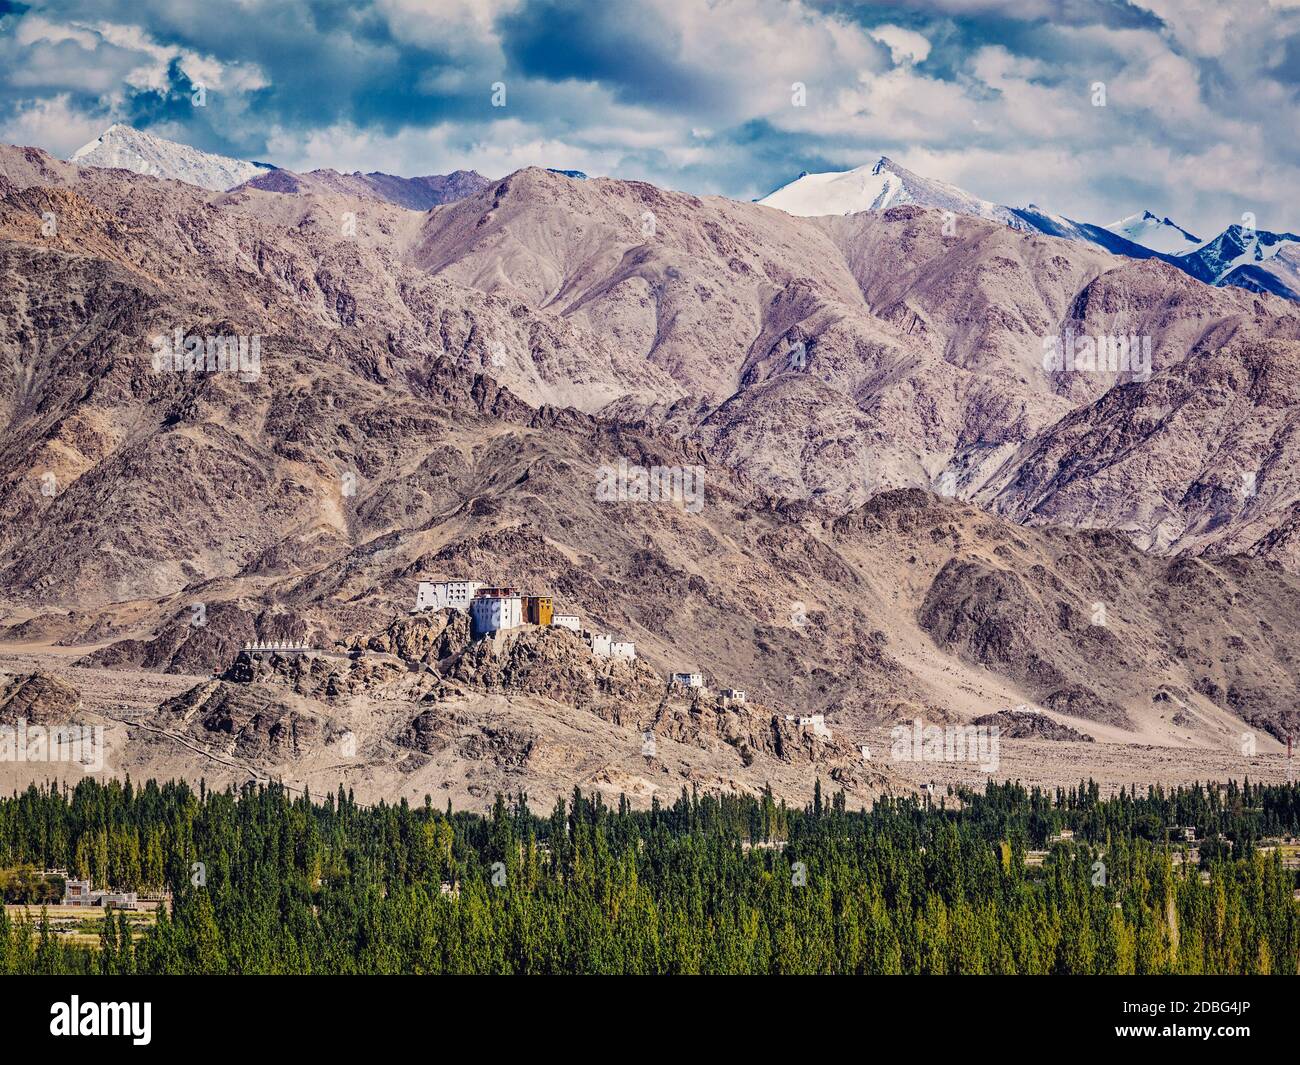 Vintage retro effect filtered hipster style image of Thiksey gompa and Himalayas. Ladakh, Jammu and Kashmir, India Stock Photo